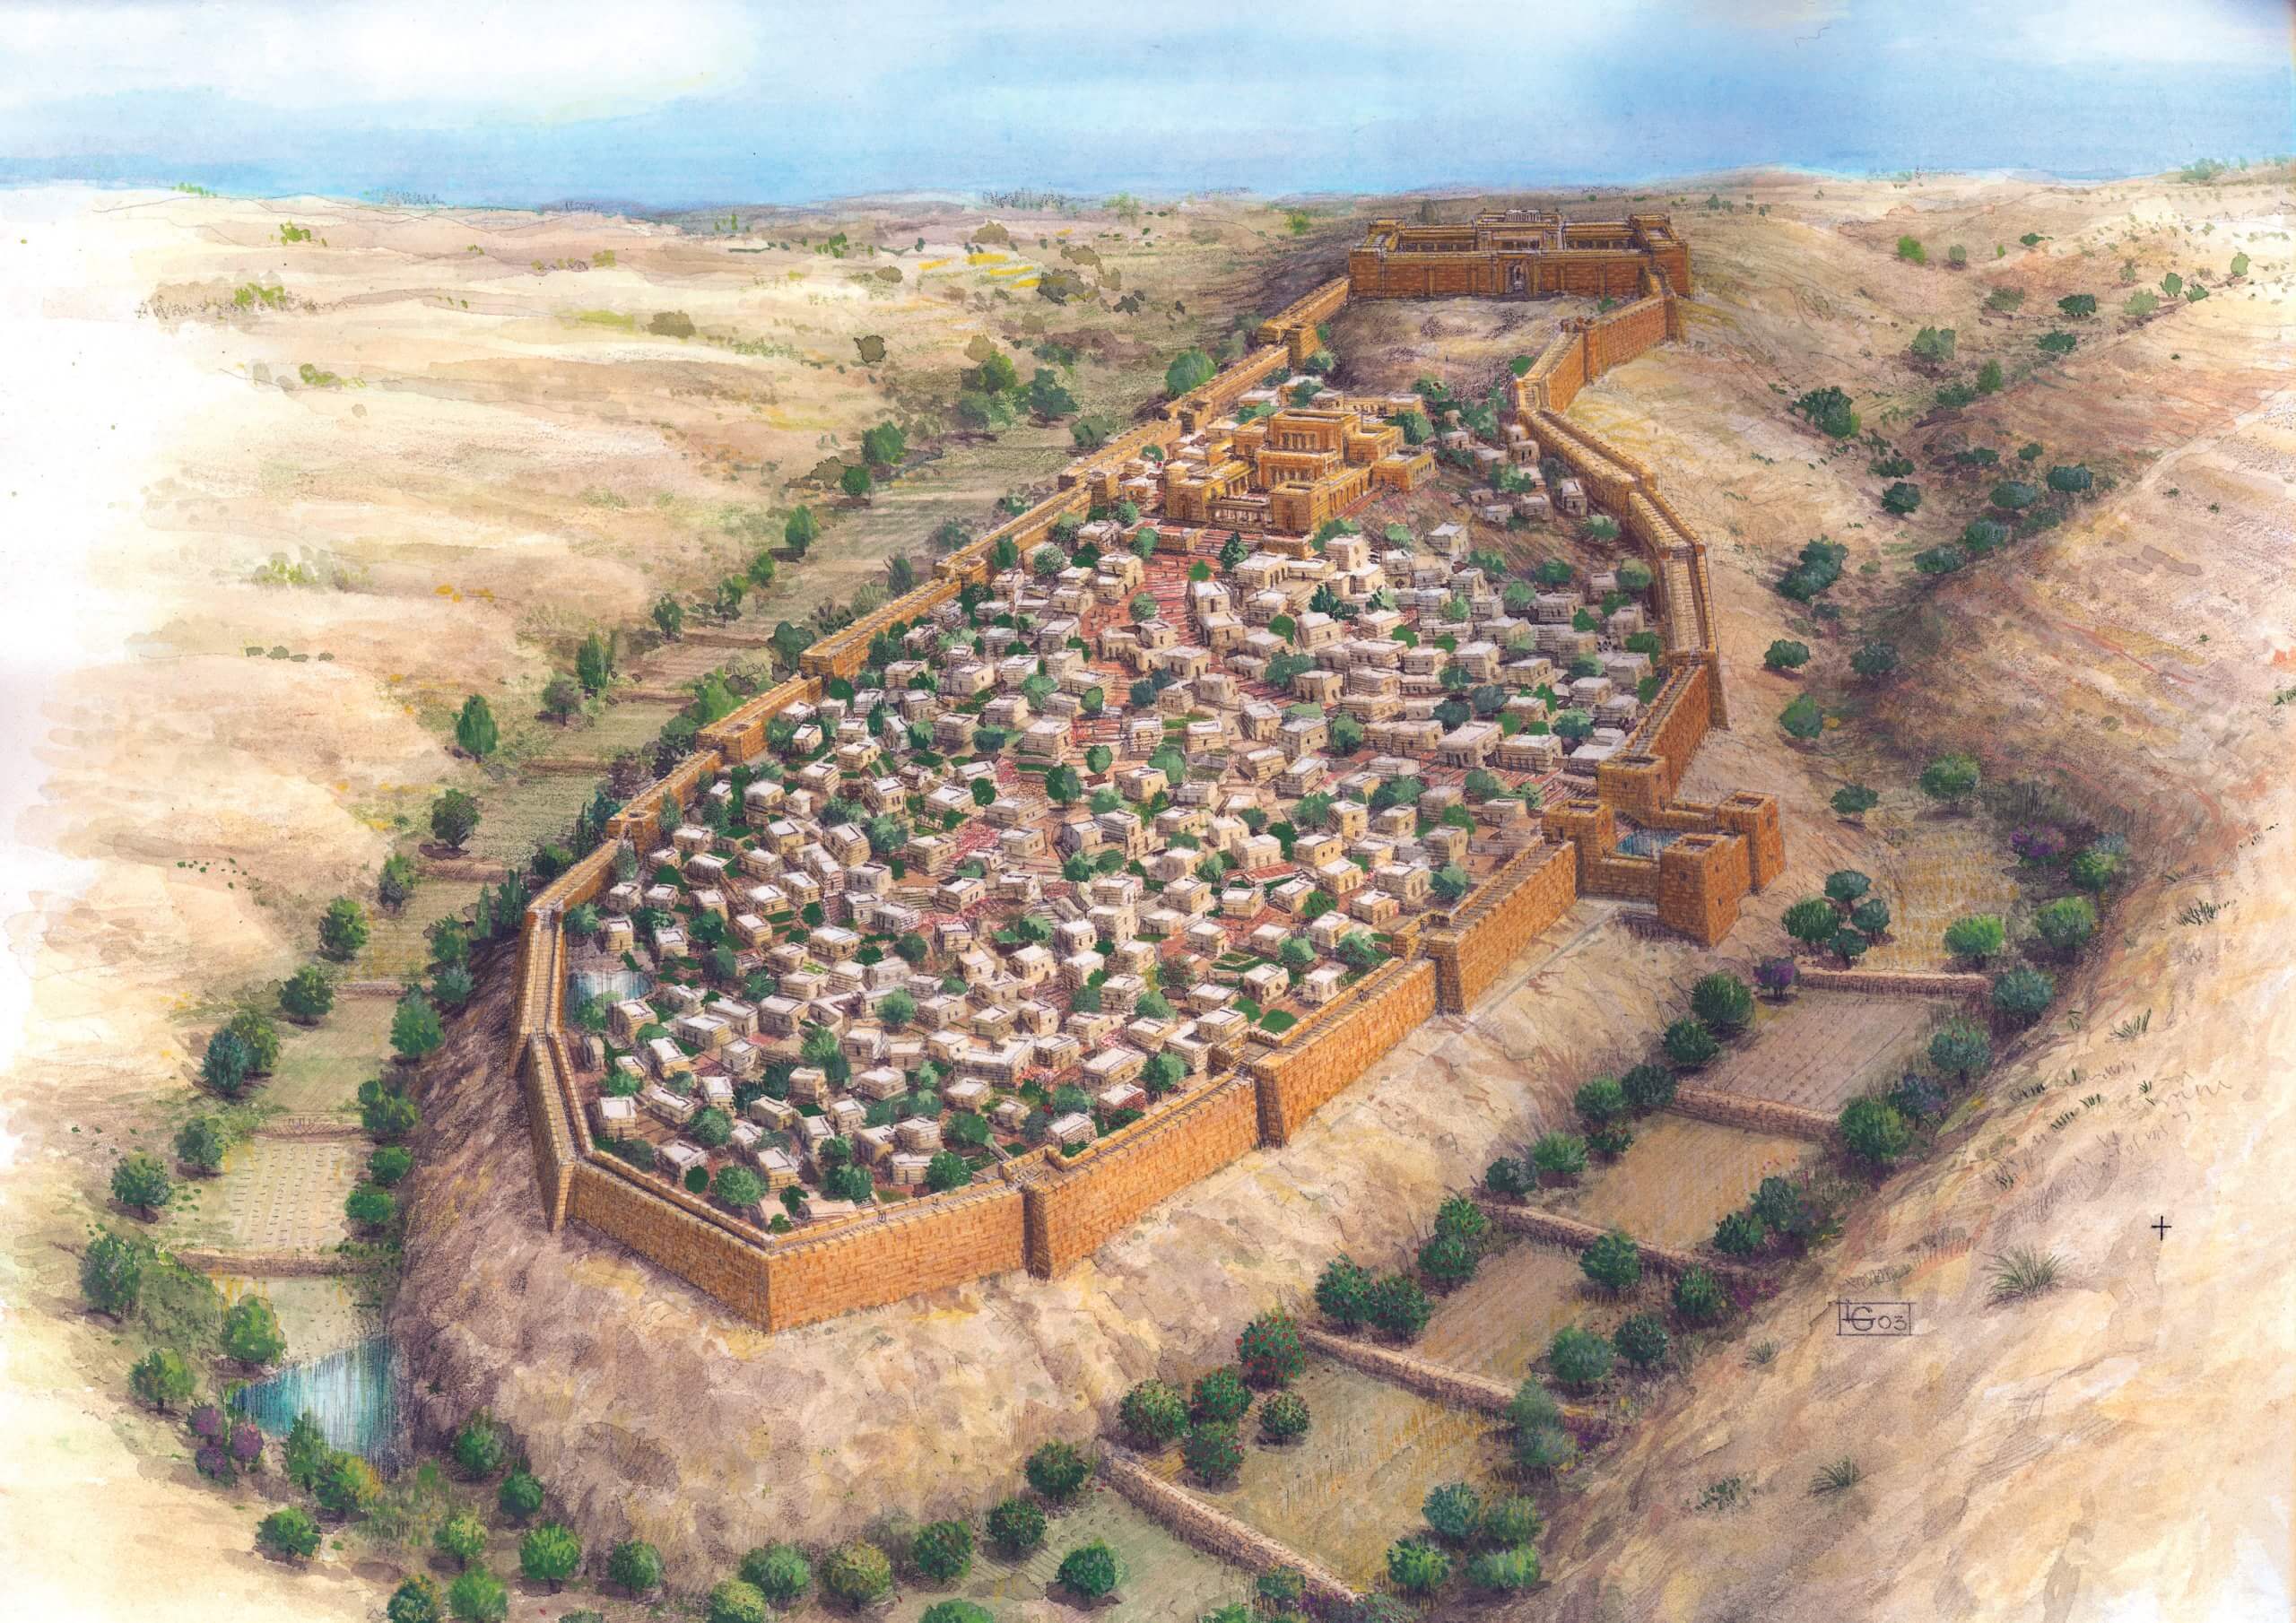 Illustration - The walls of the city of Jerusalem during the days of the First Temple - Leonardo Gurvitz - City of David Archives